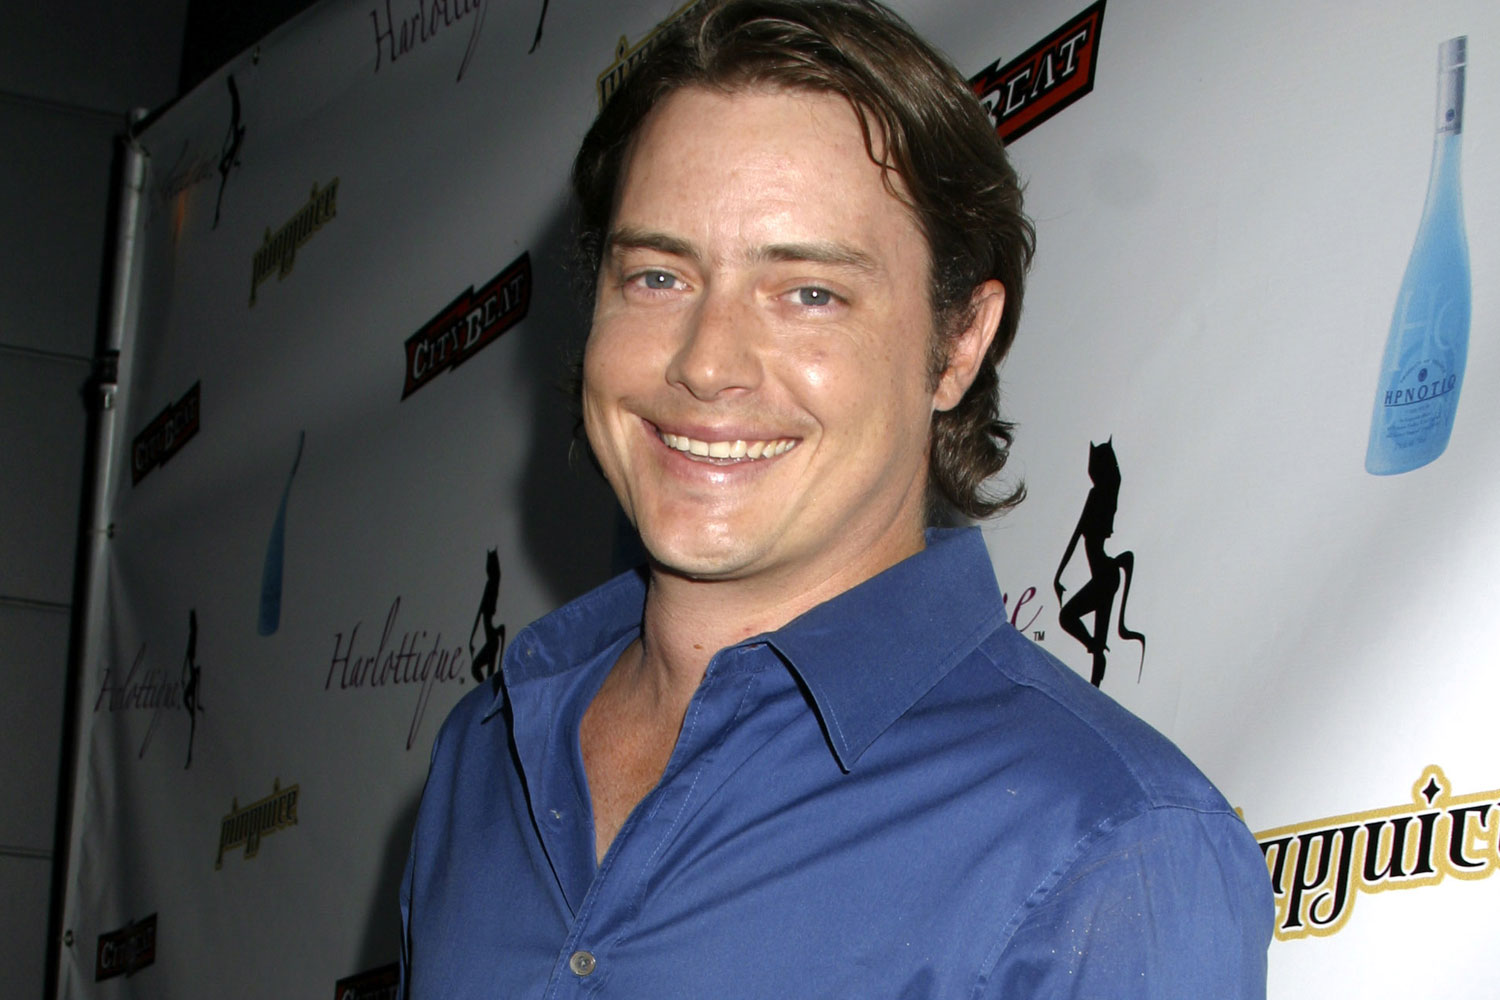 7th heaven actor Jeremy London arrested for alleged domestic violence | WHO Magazine